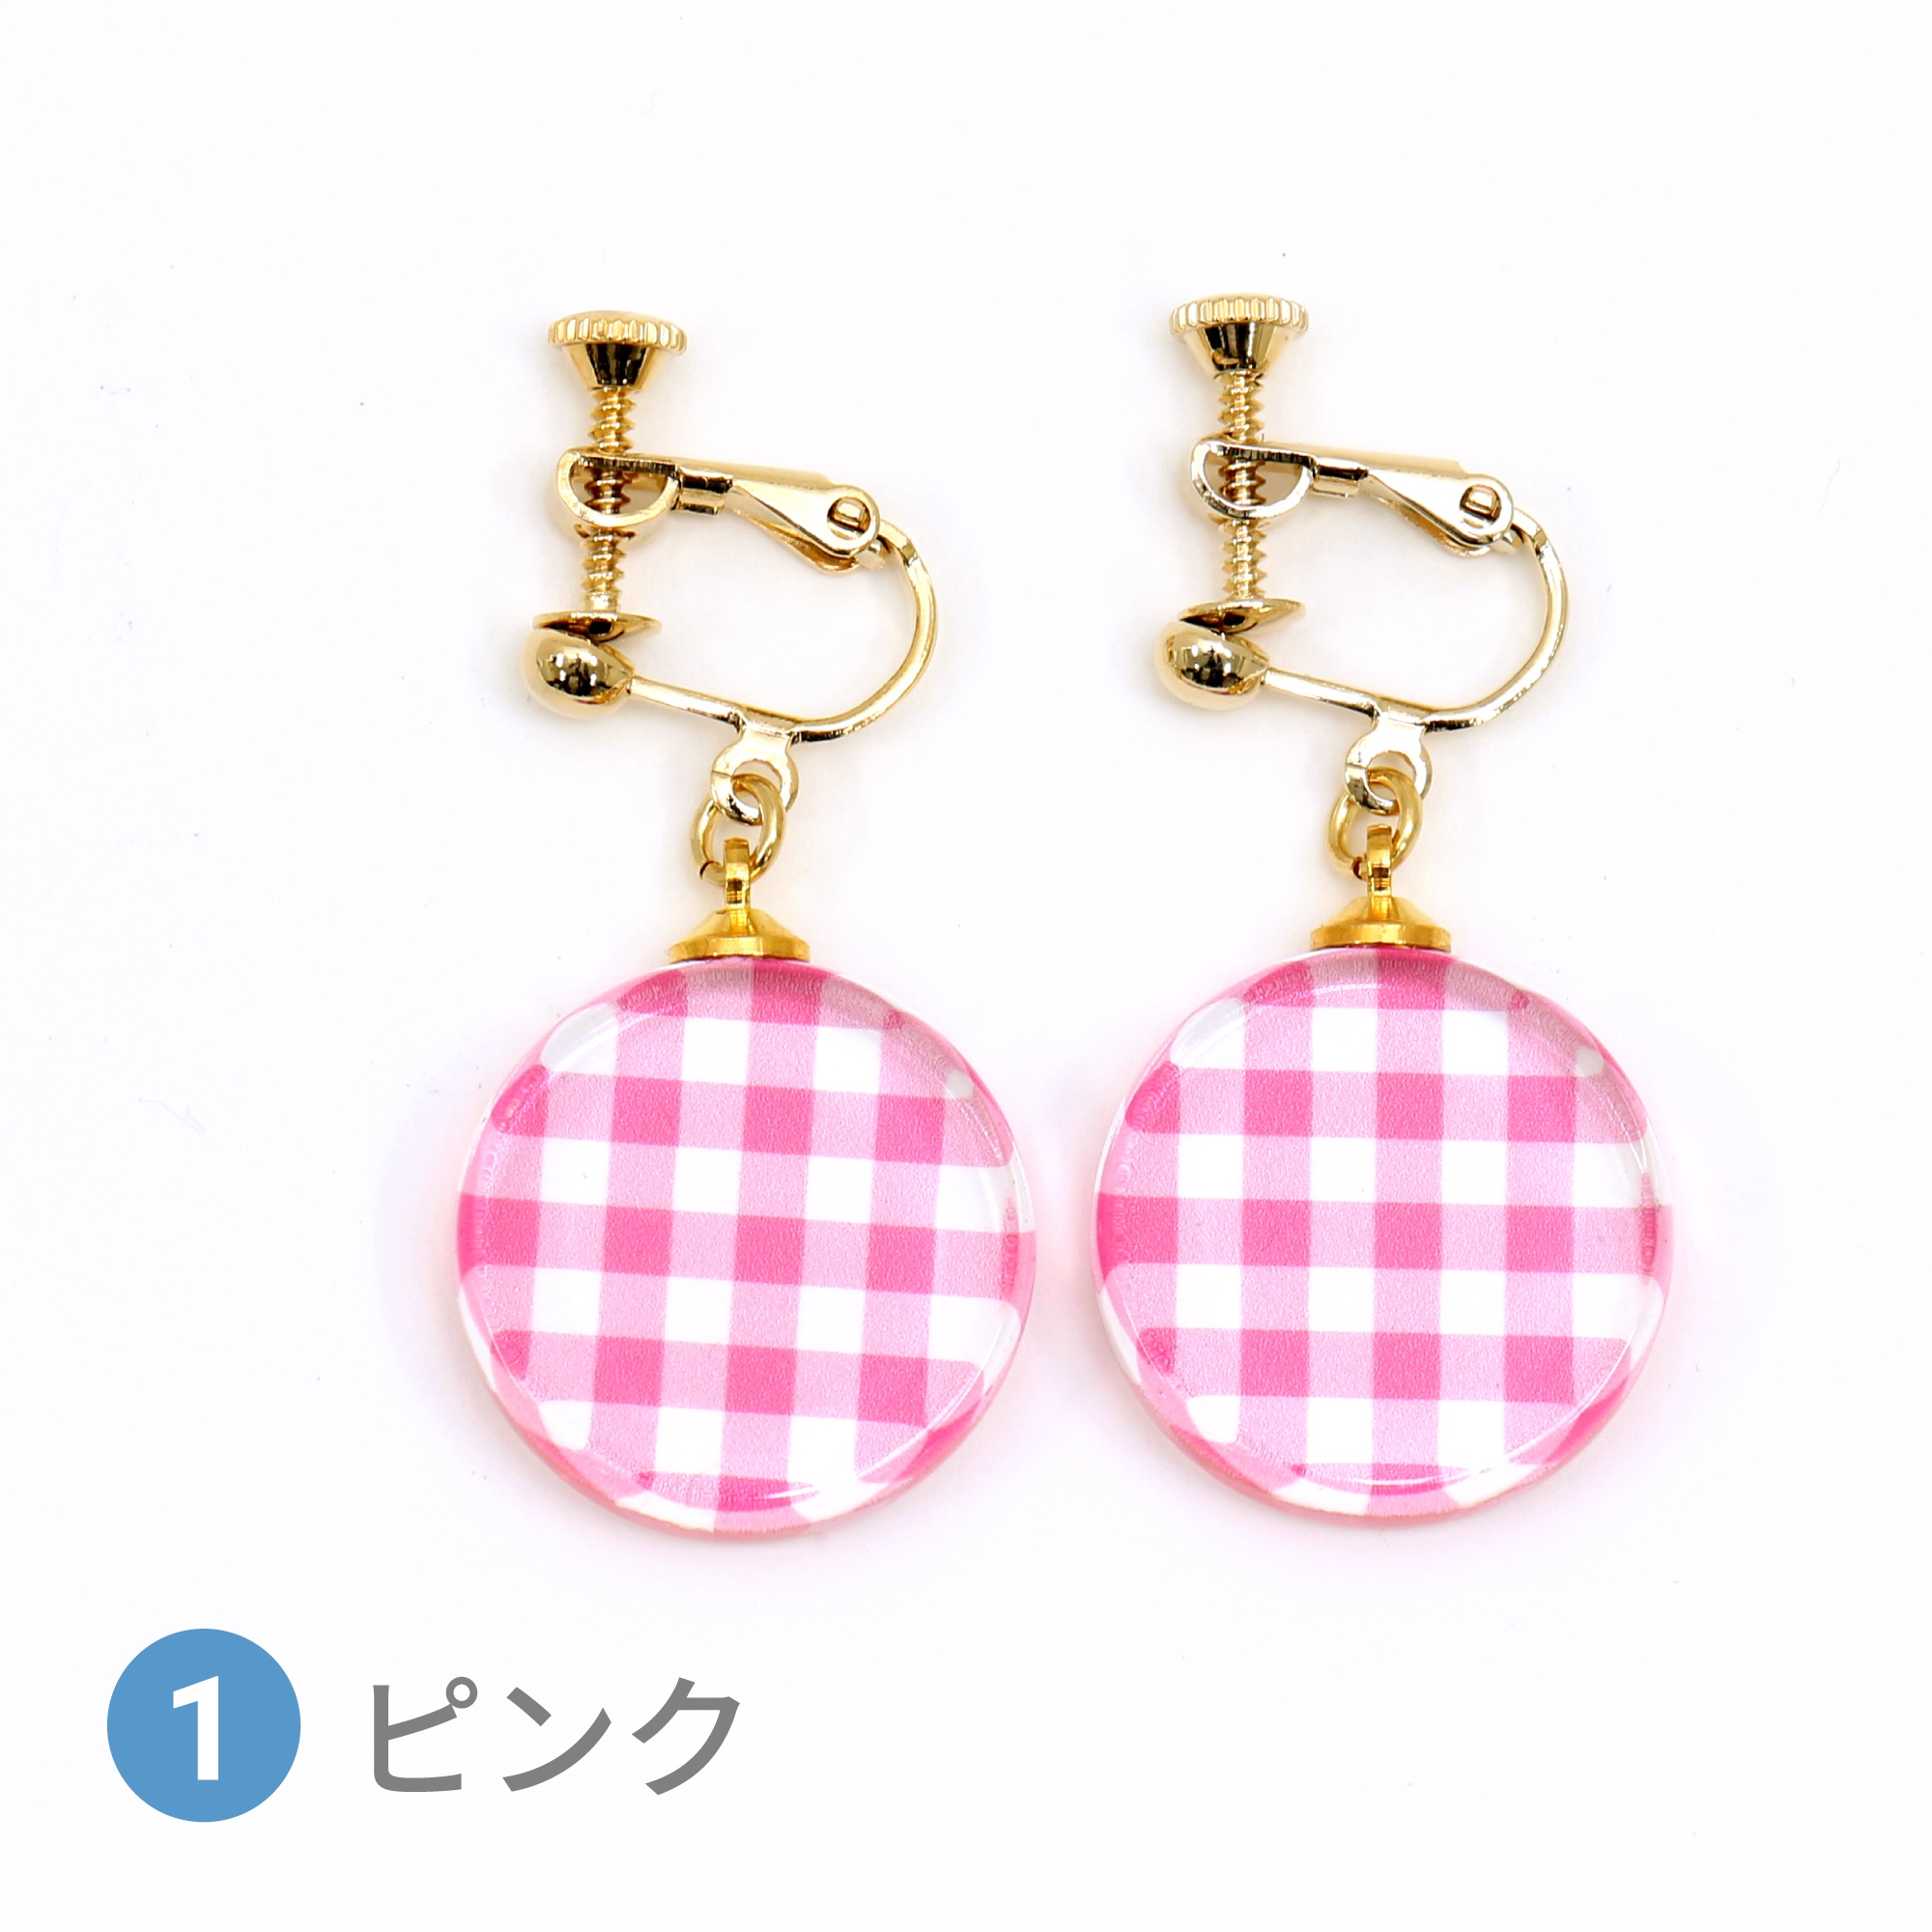 Glass accessories Earring GINGHAM CHECK pink round shape